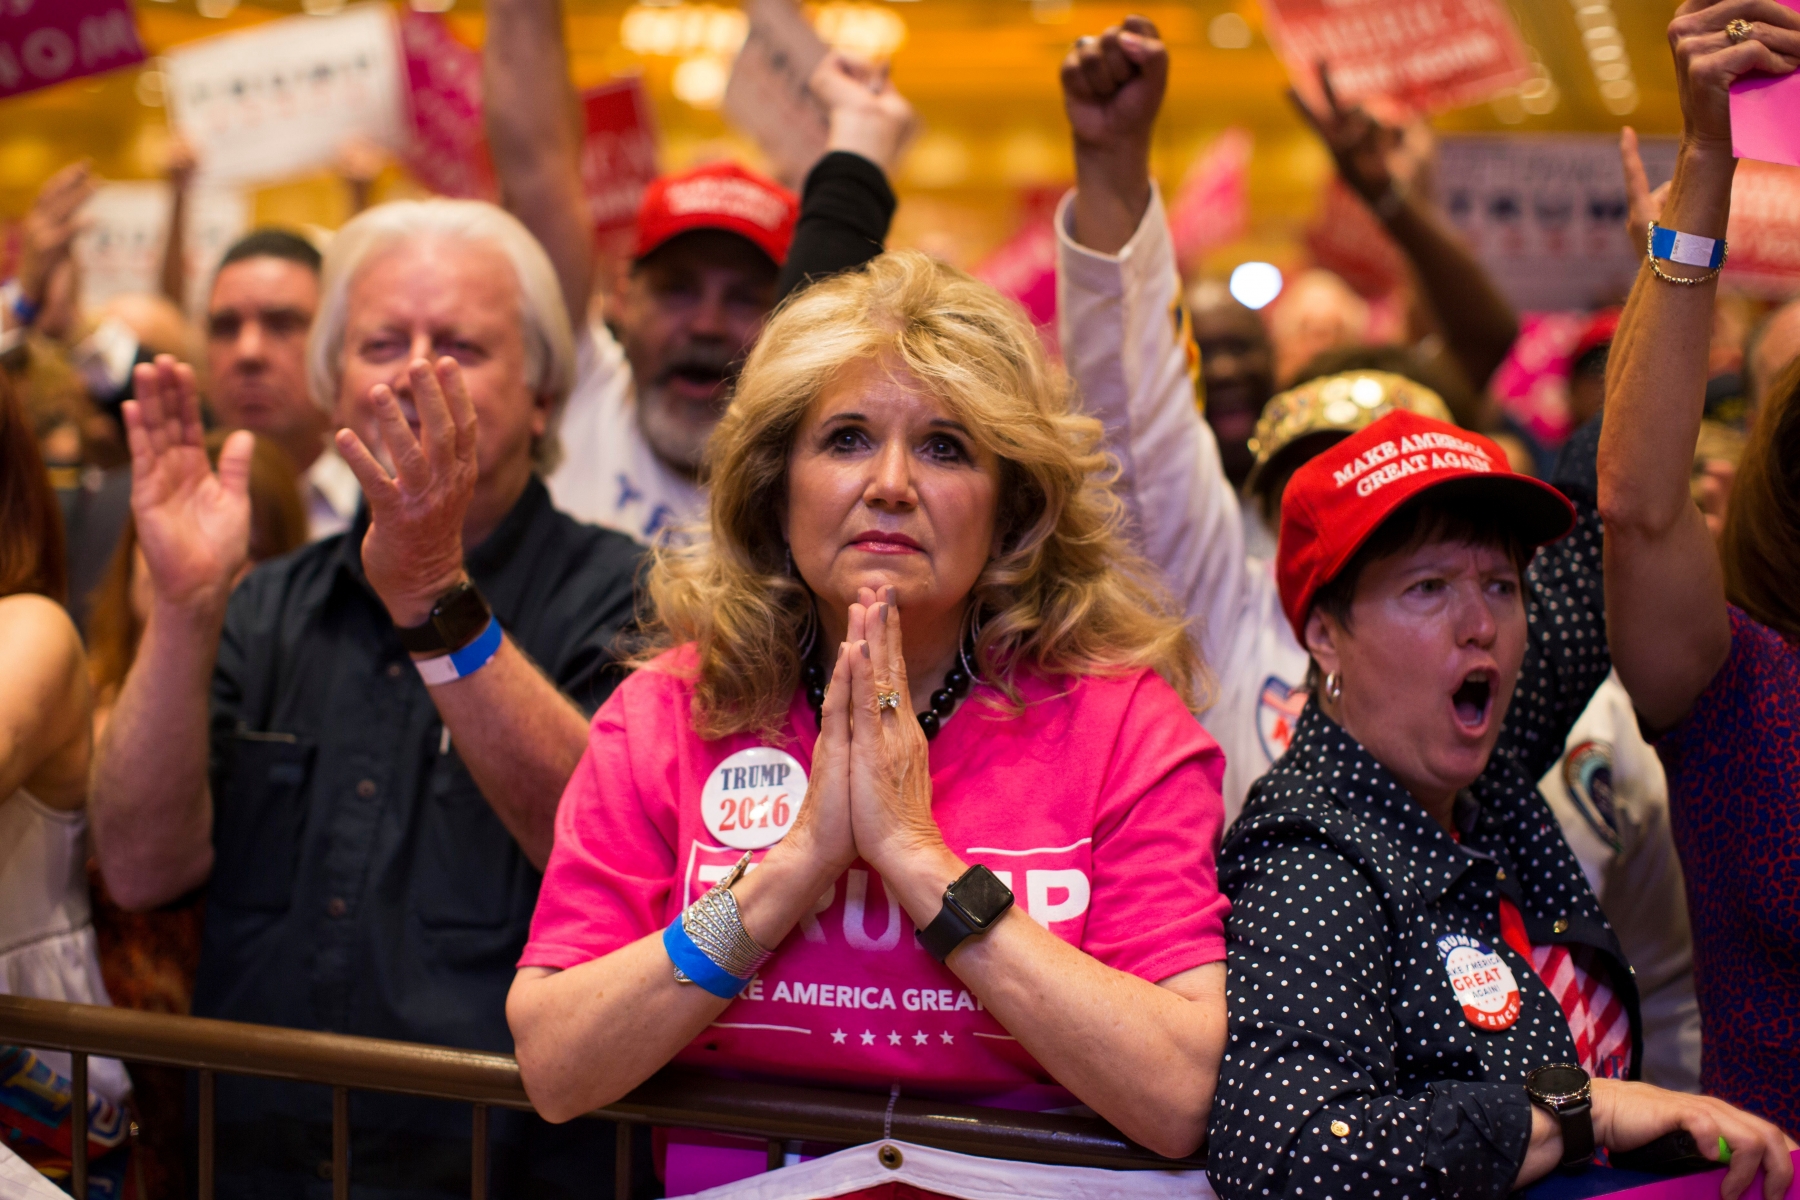 Supporters of Republican presidential candidate Donald Trump watch him speak during a campaign rally, Sunday, Oct. 30, 2016, in Las Vegas. (AP Photo/ Evan Vucci) Campaign 2016 Trump